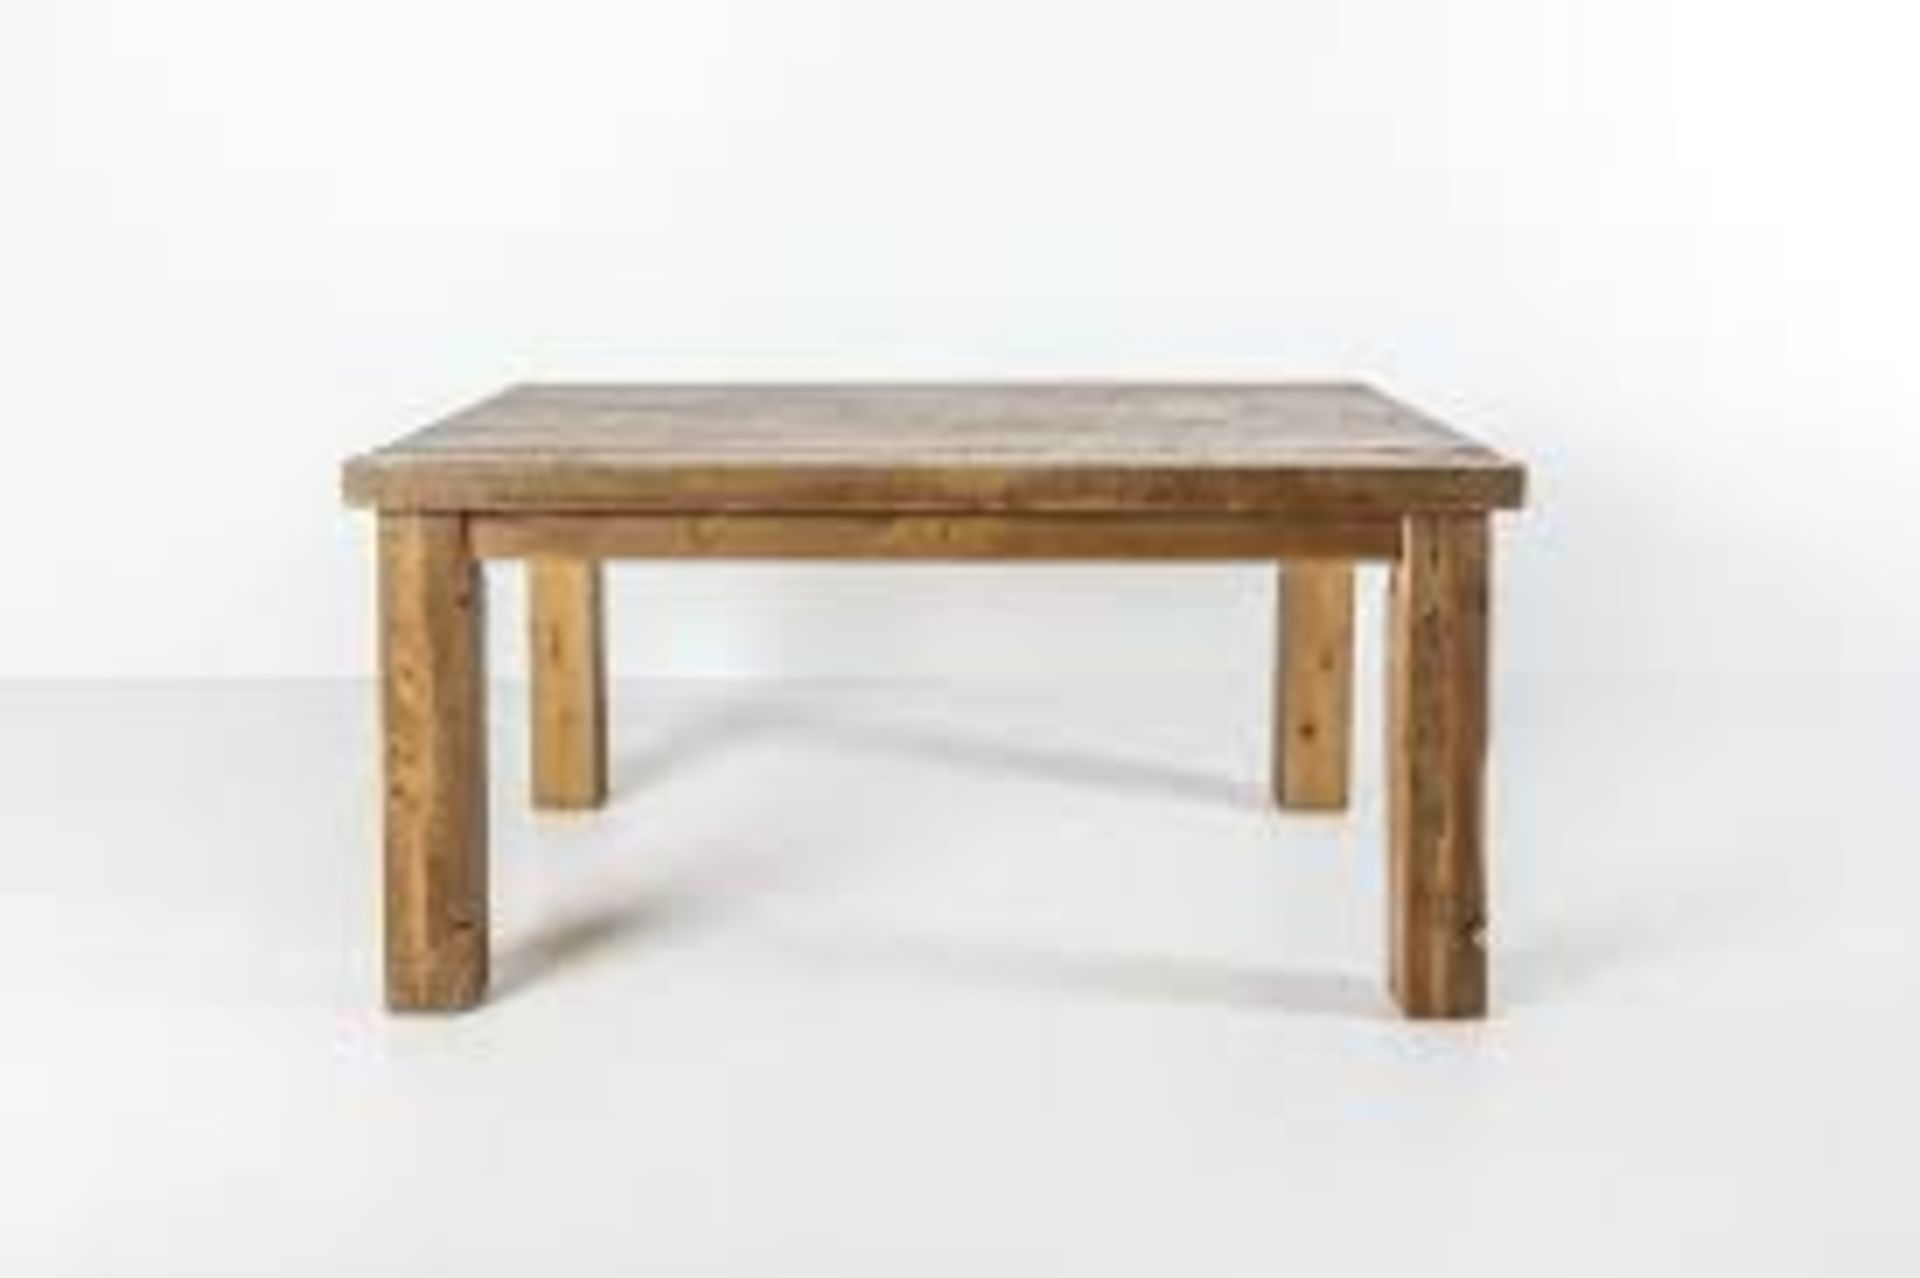 RRP £500 Brand New Factory Sealed Hudson Living Rustic Dining Table